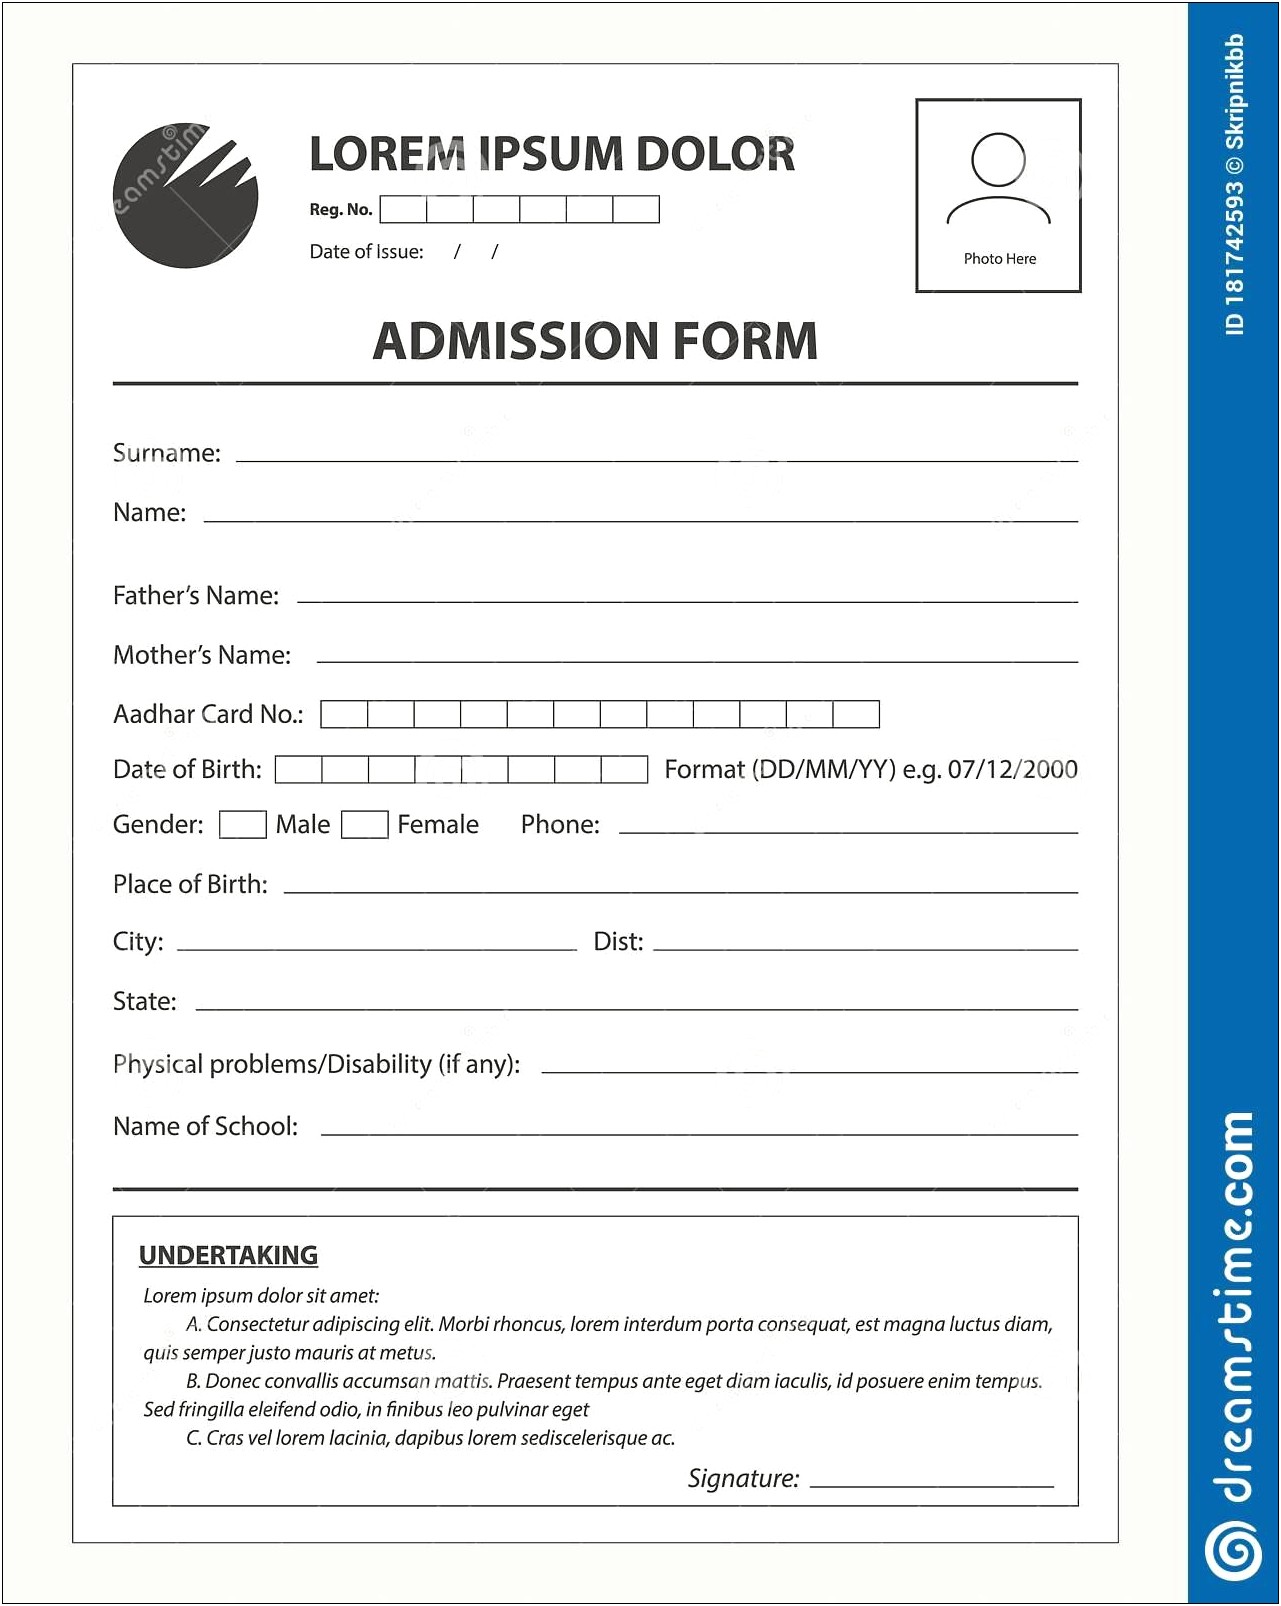 Registration Form Template In Html Free Download